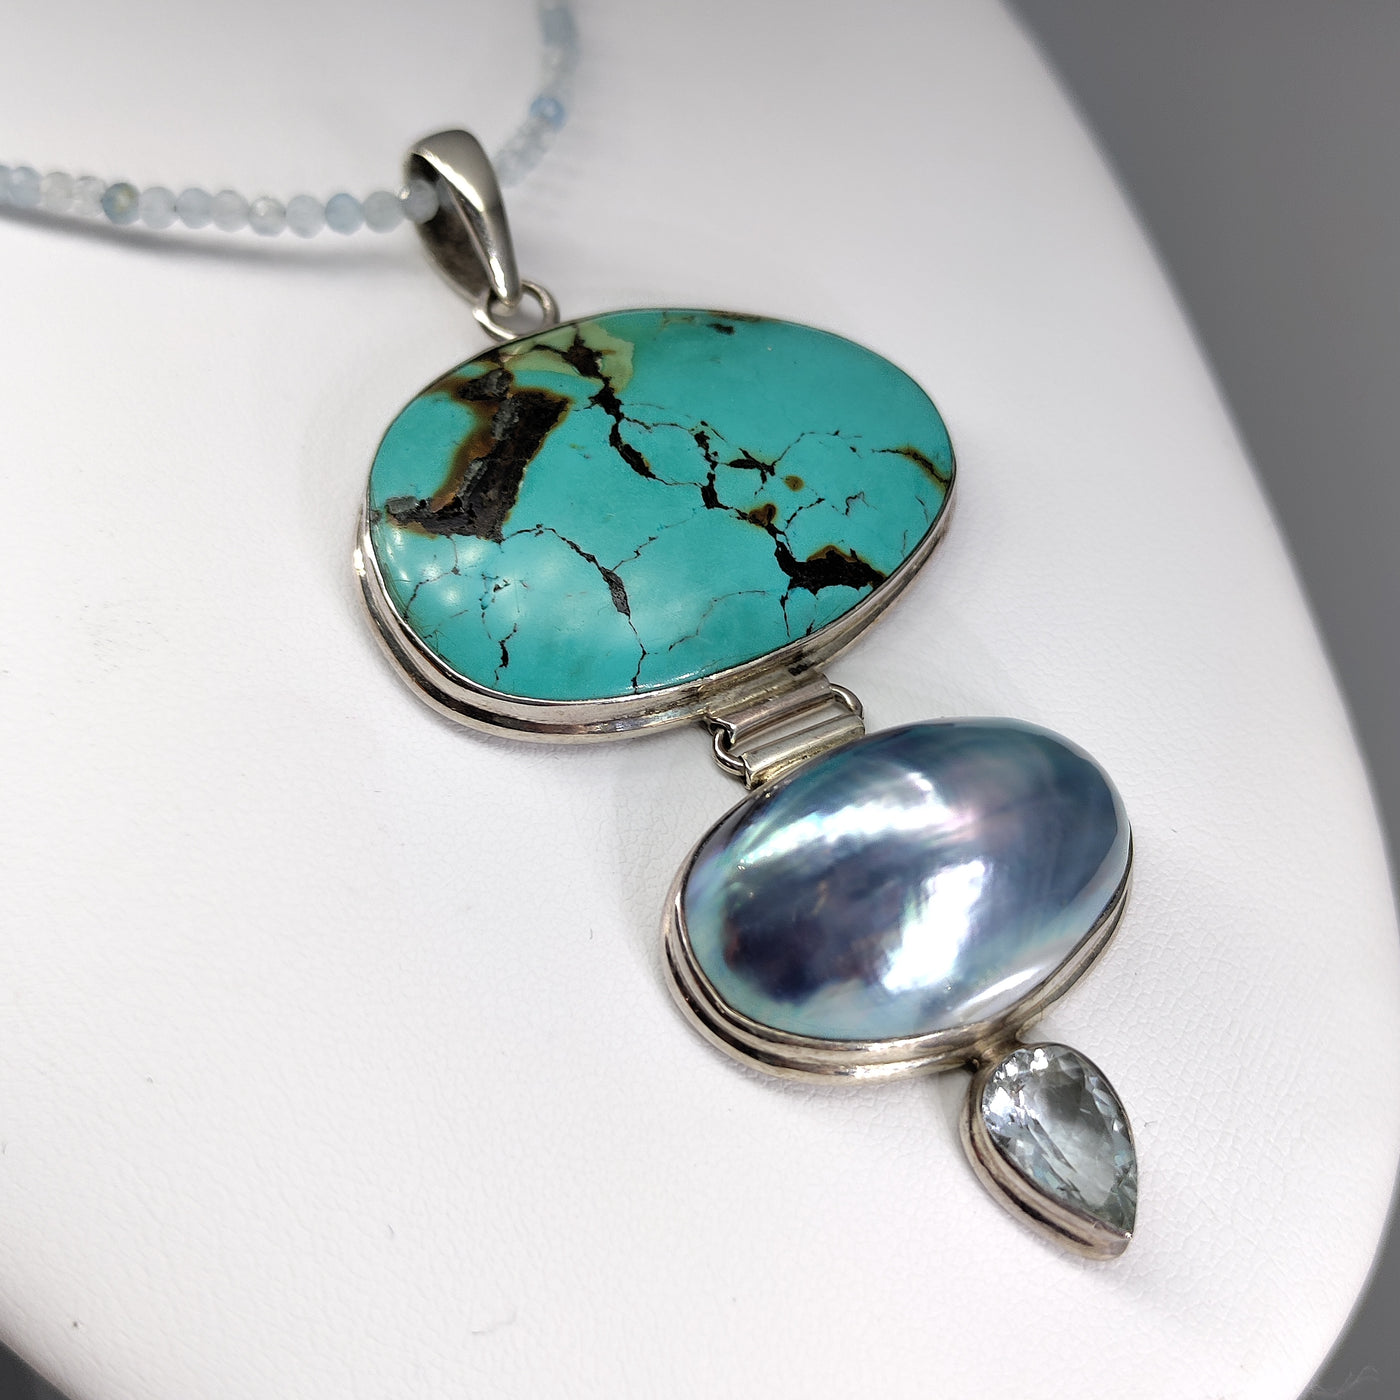 "Blue Drops" Pendant Necklace - Turquoise, Mother-of-Pearl, Topaz, Sterling